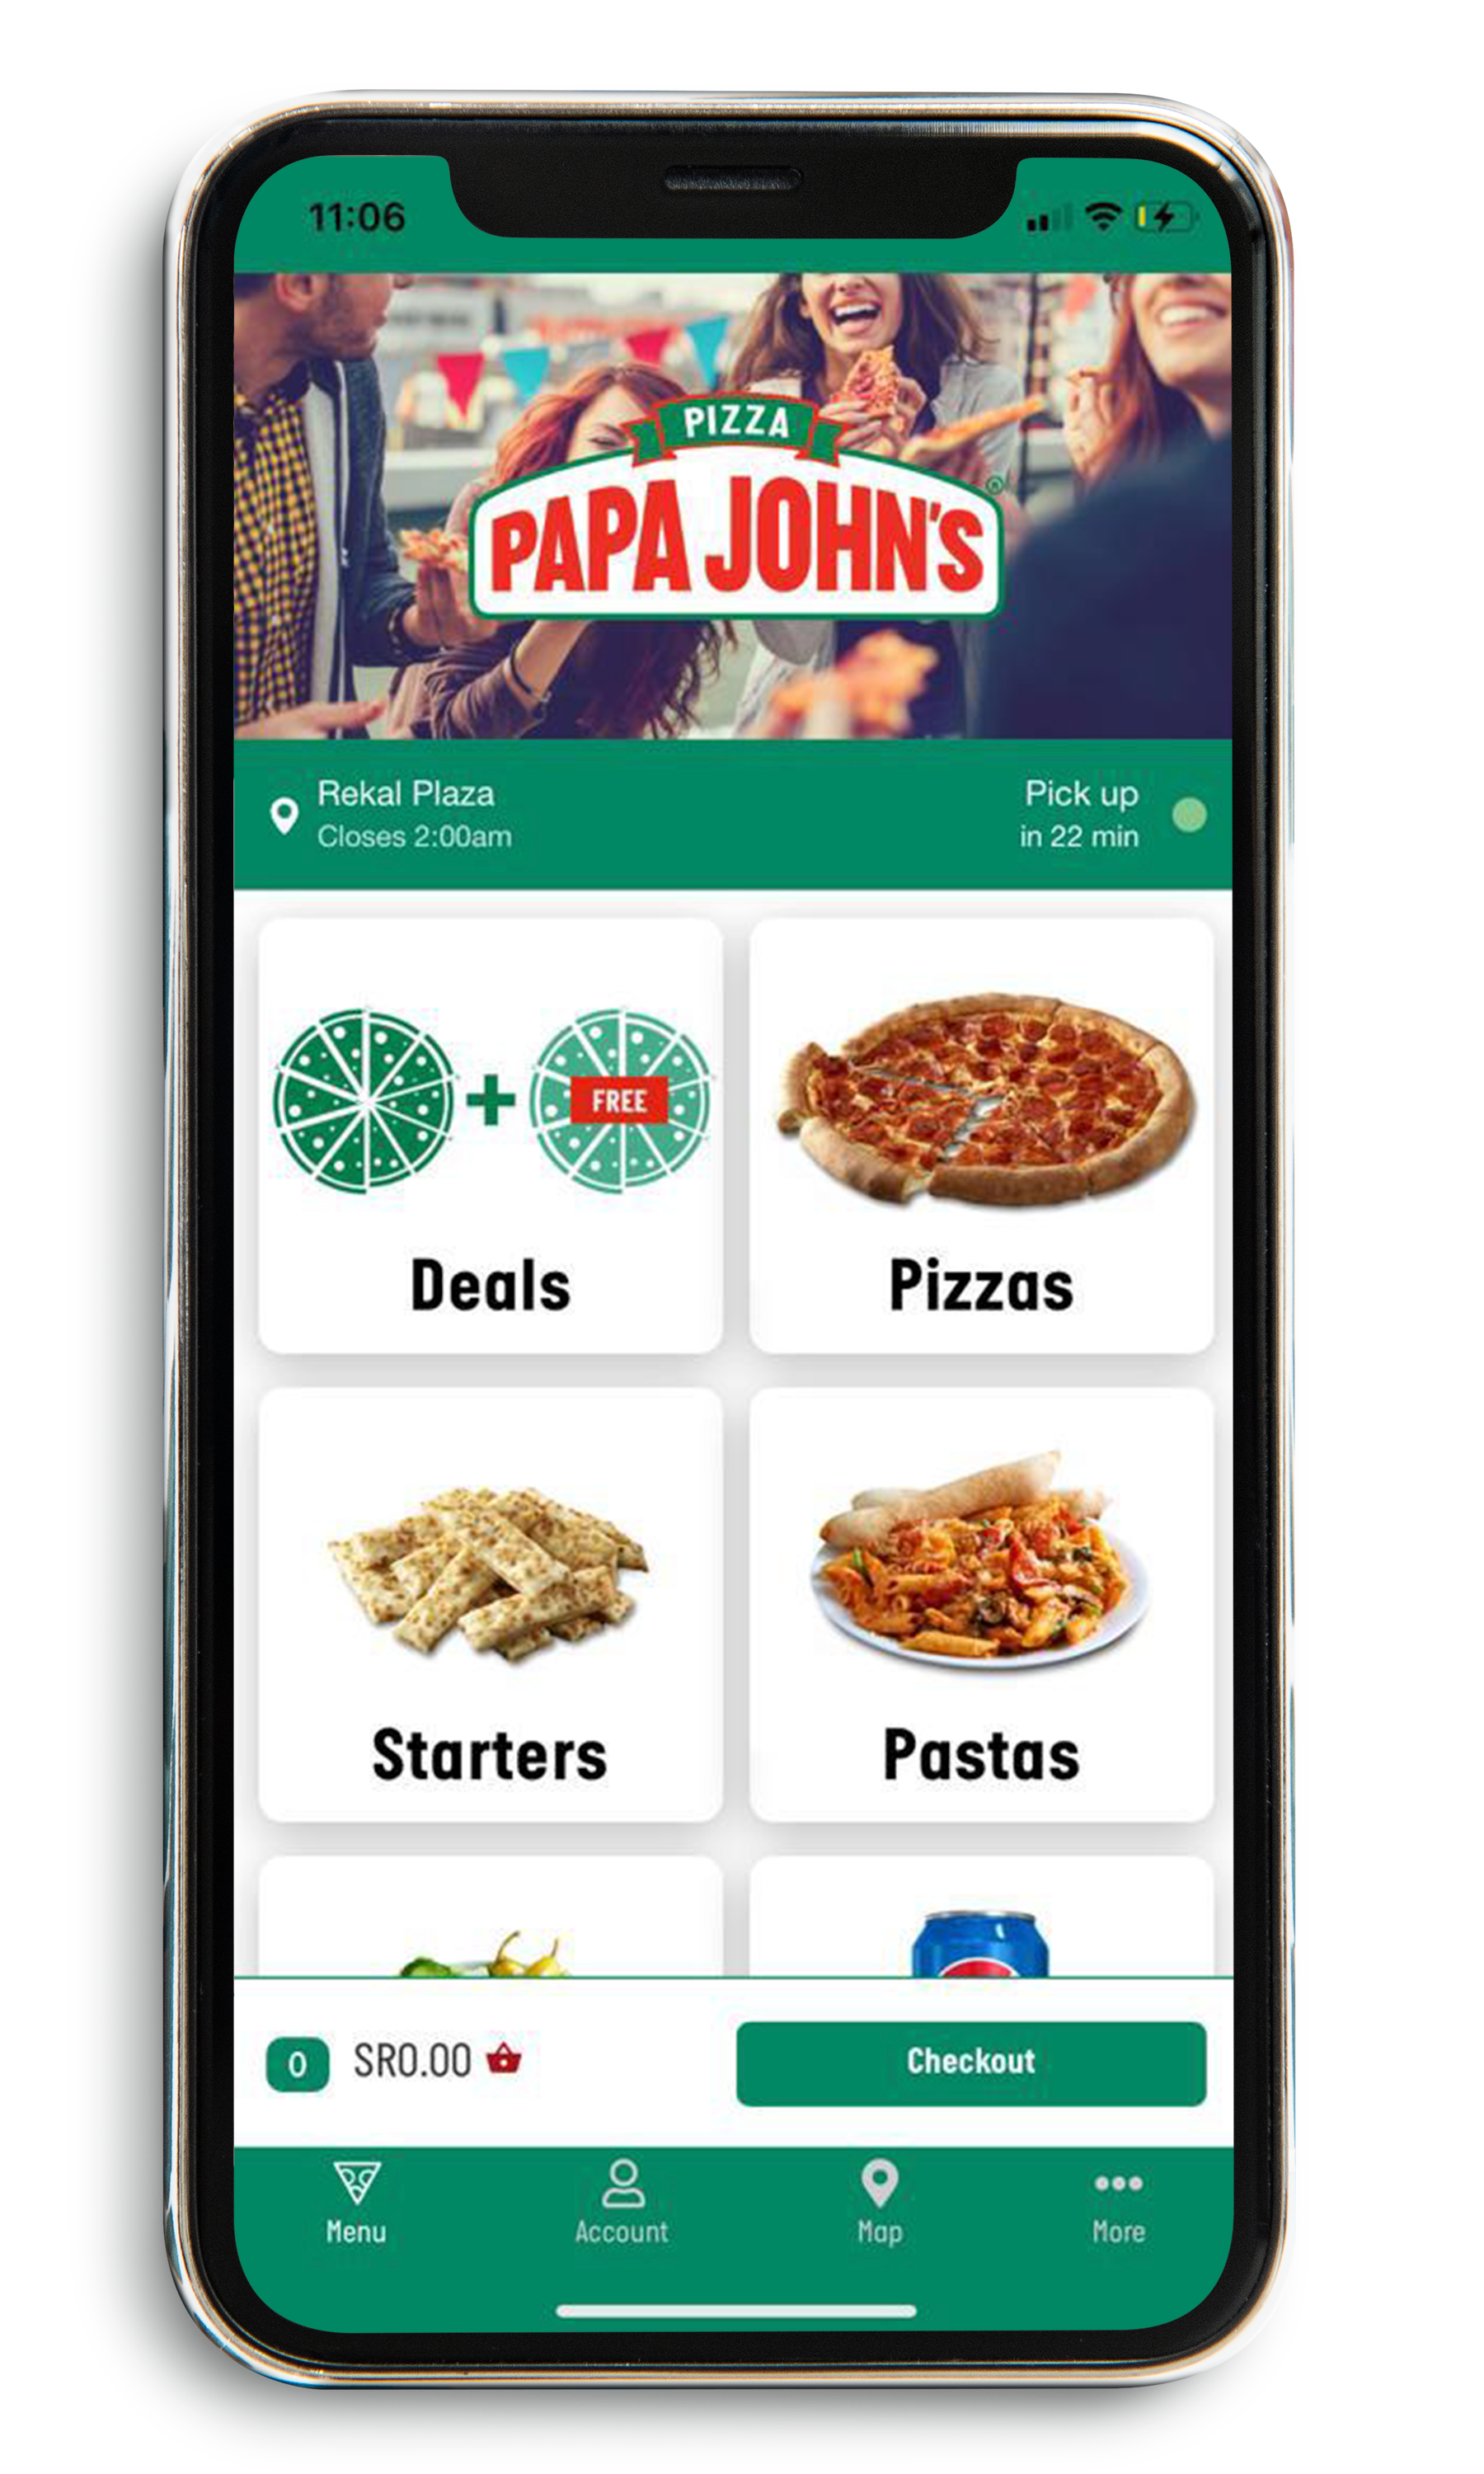 Web Delivery - Papa Pizza